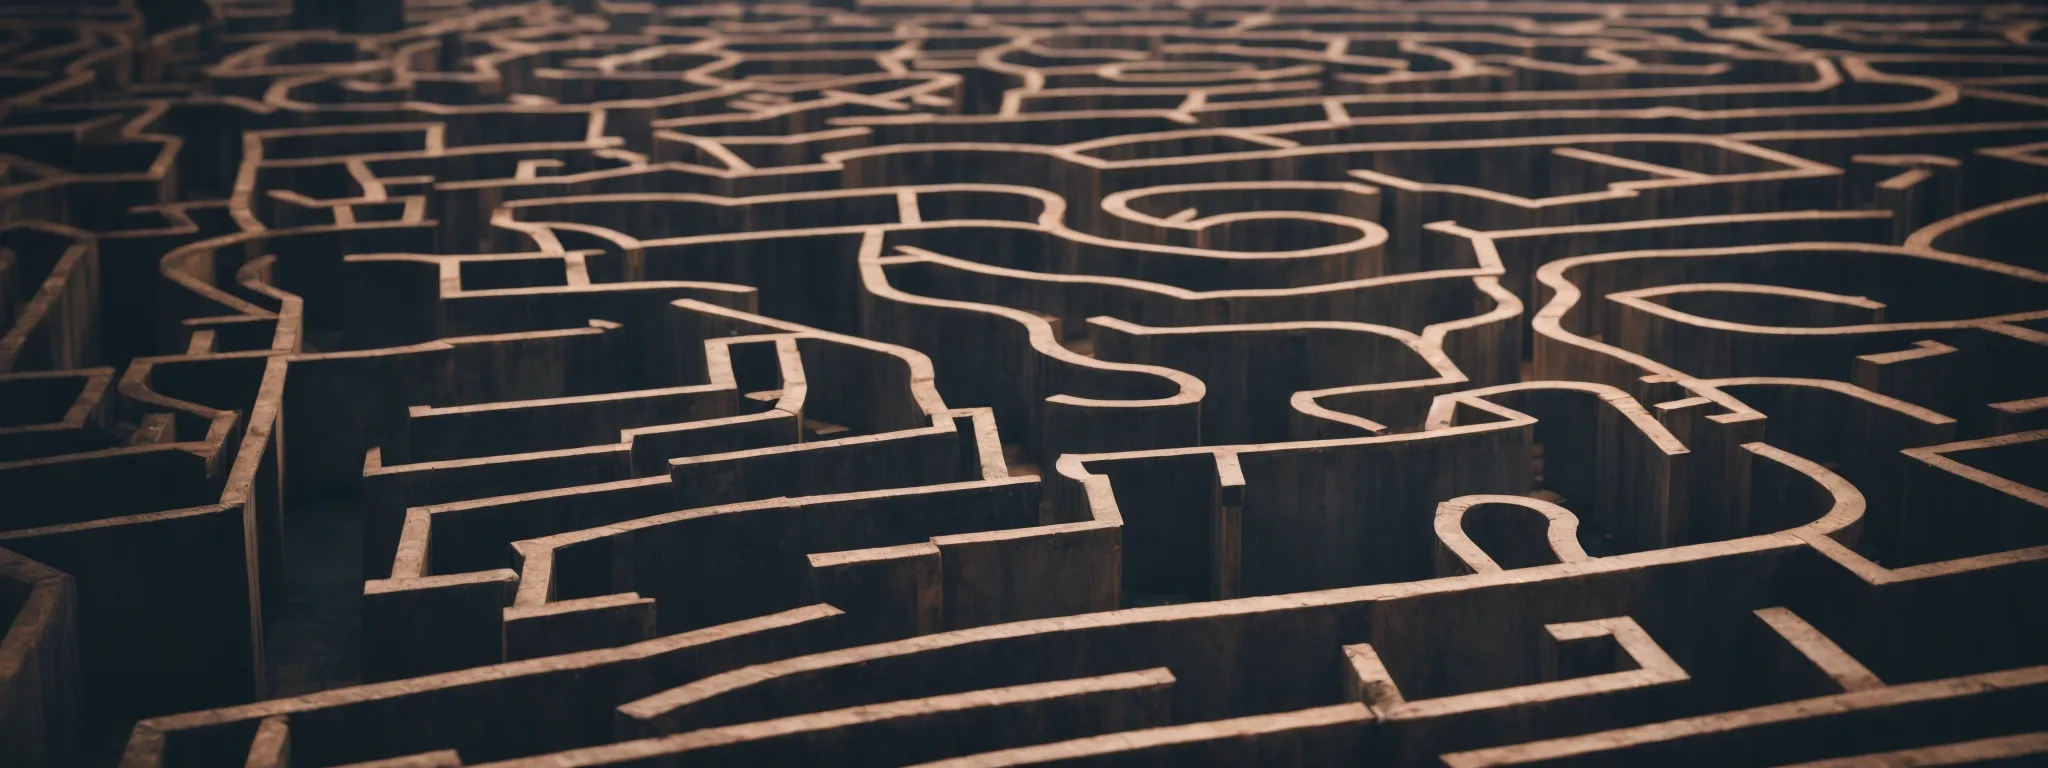 a maze with a clear path marked towards an exit, symbolizing navigational strategy within a website.